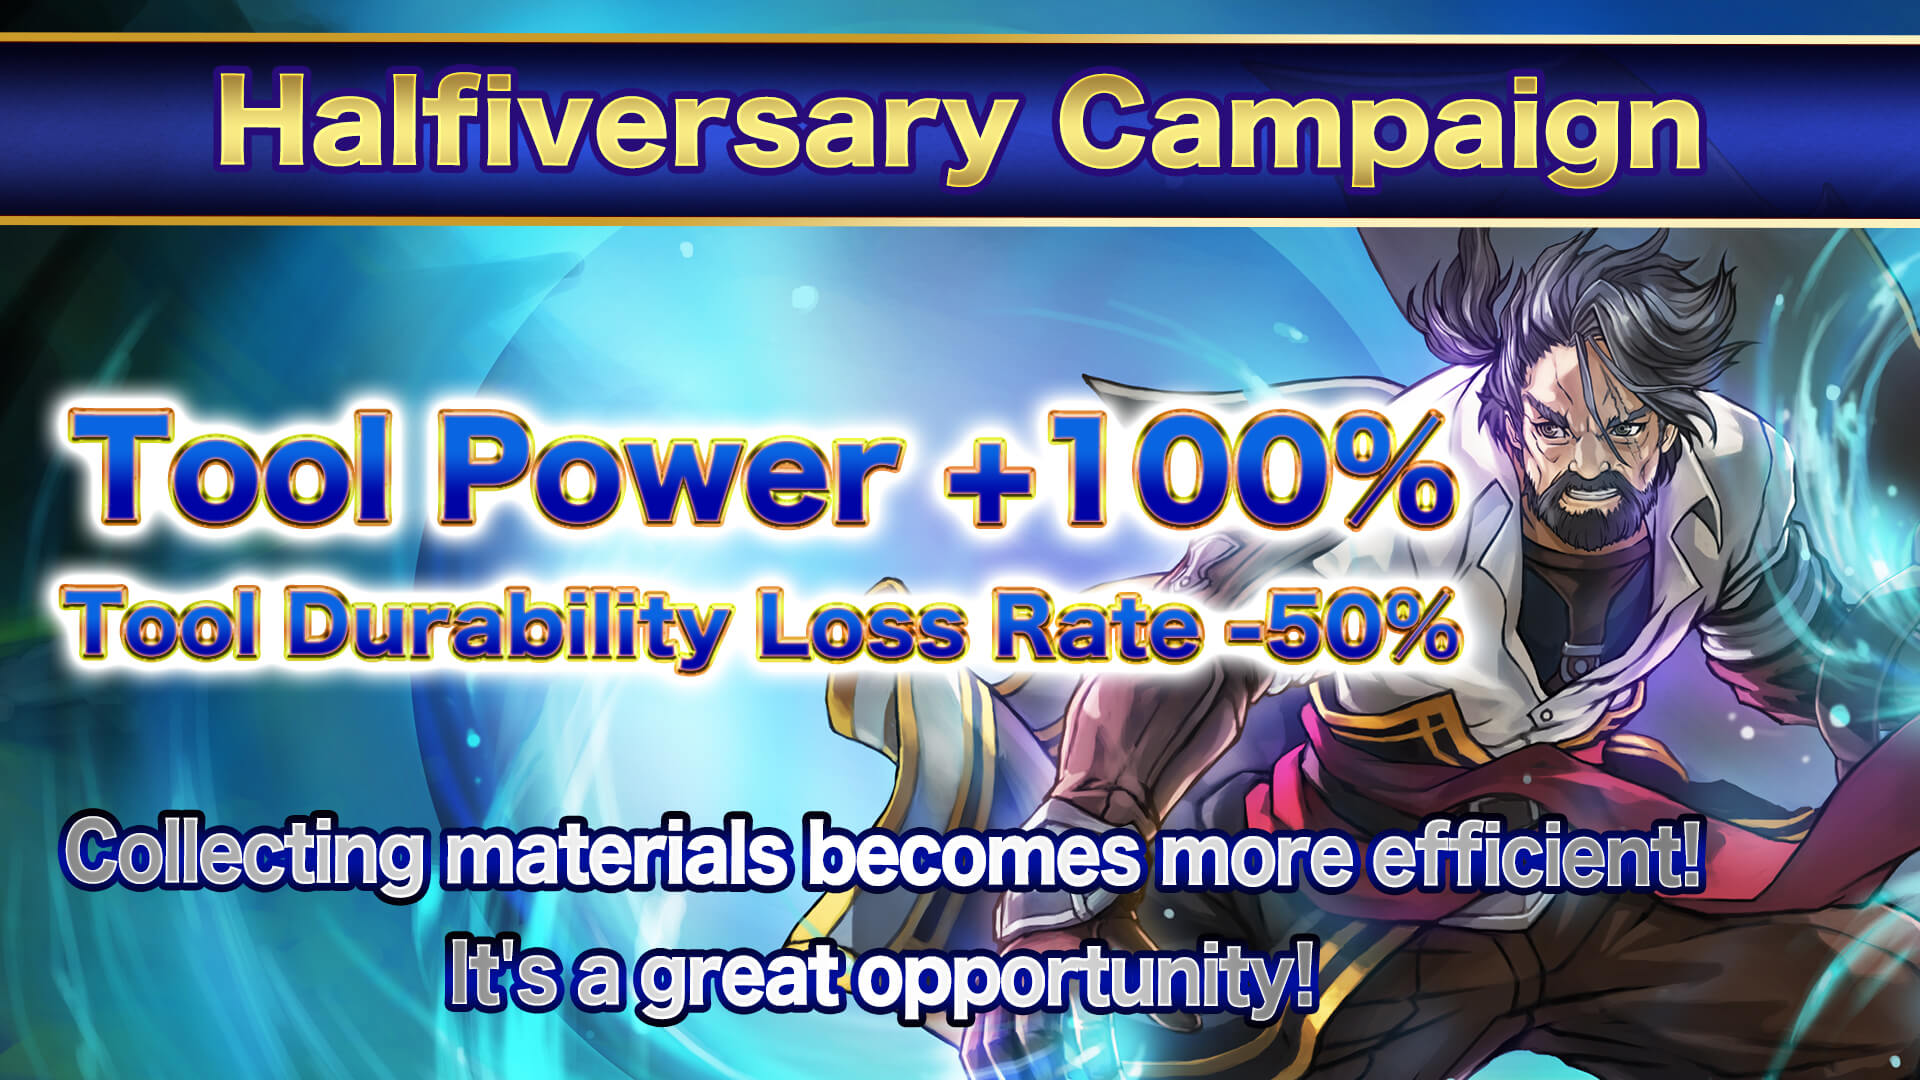 Tool Power & Tool Durability Loss Rate Campaign